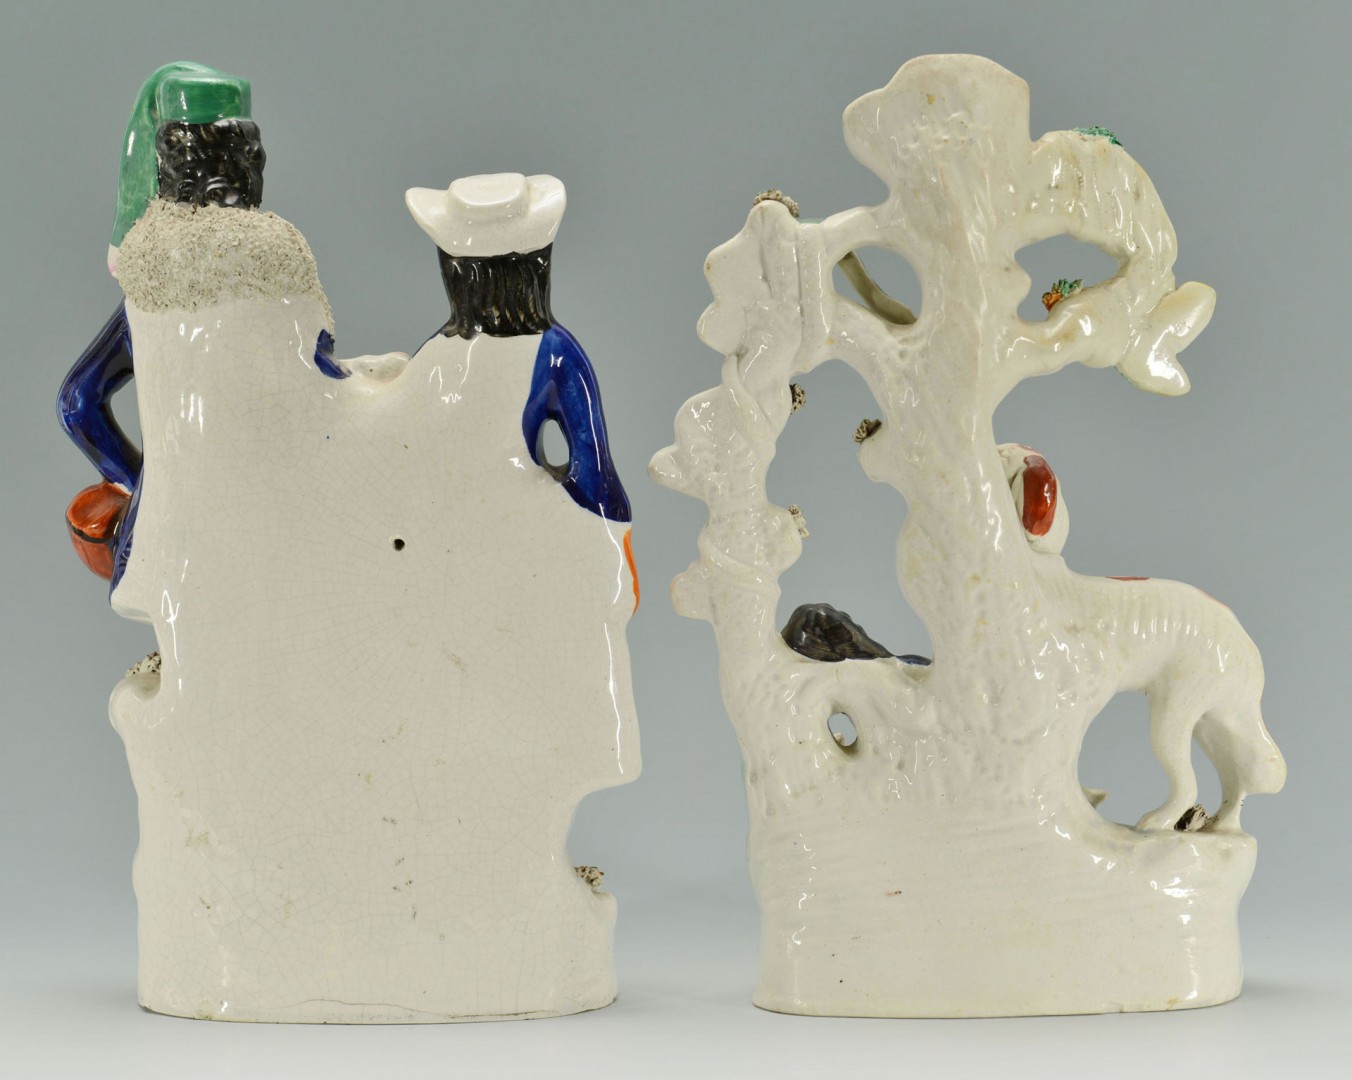 Lot 277: 2 Staffordshire Figural Groups, people and animals